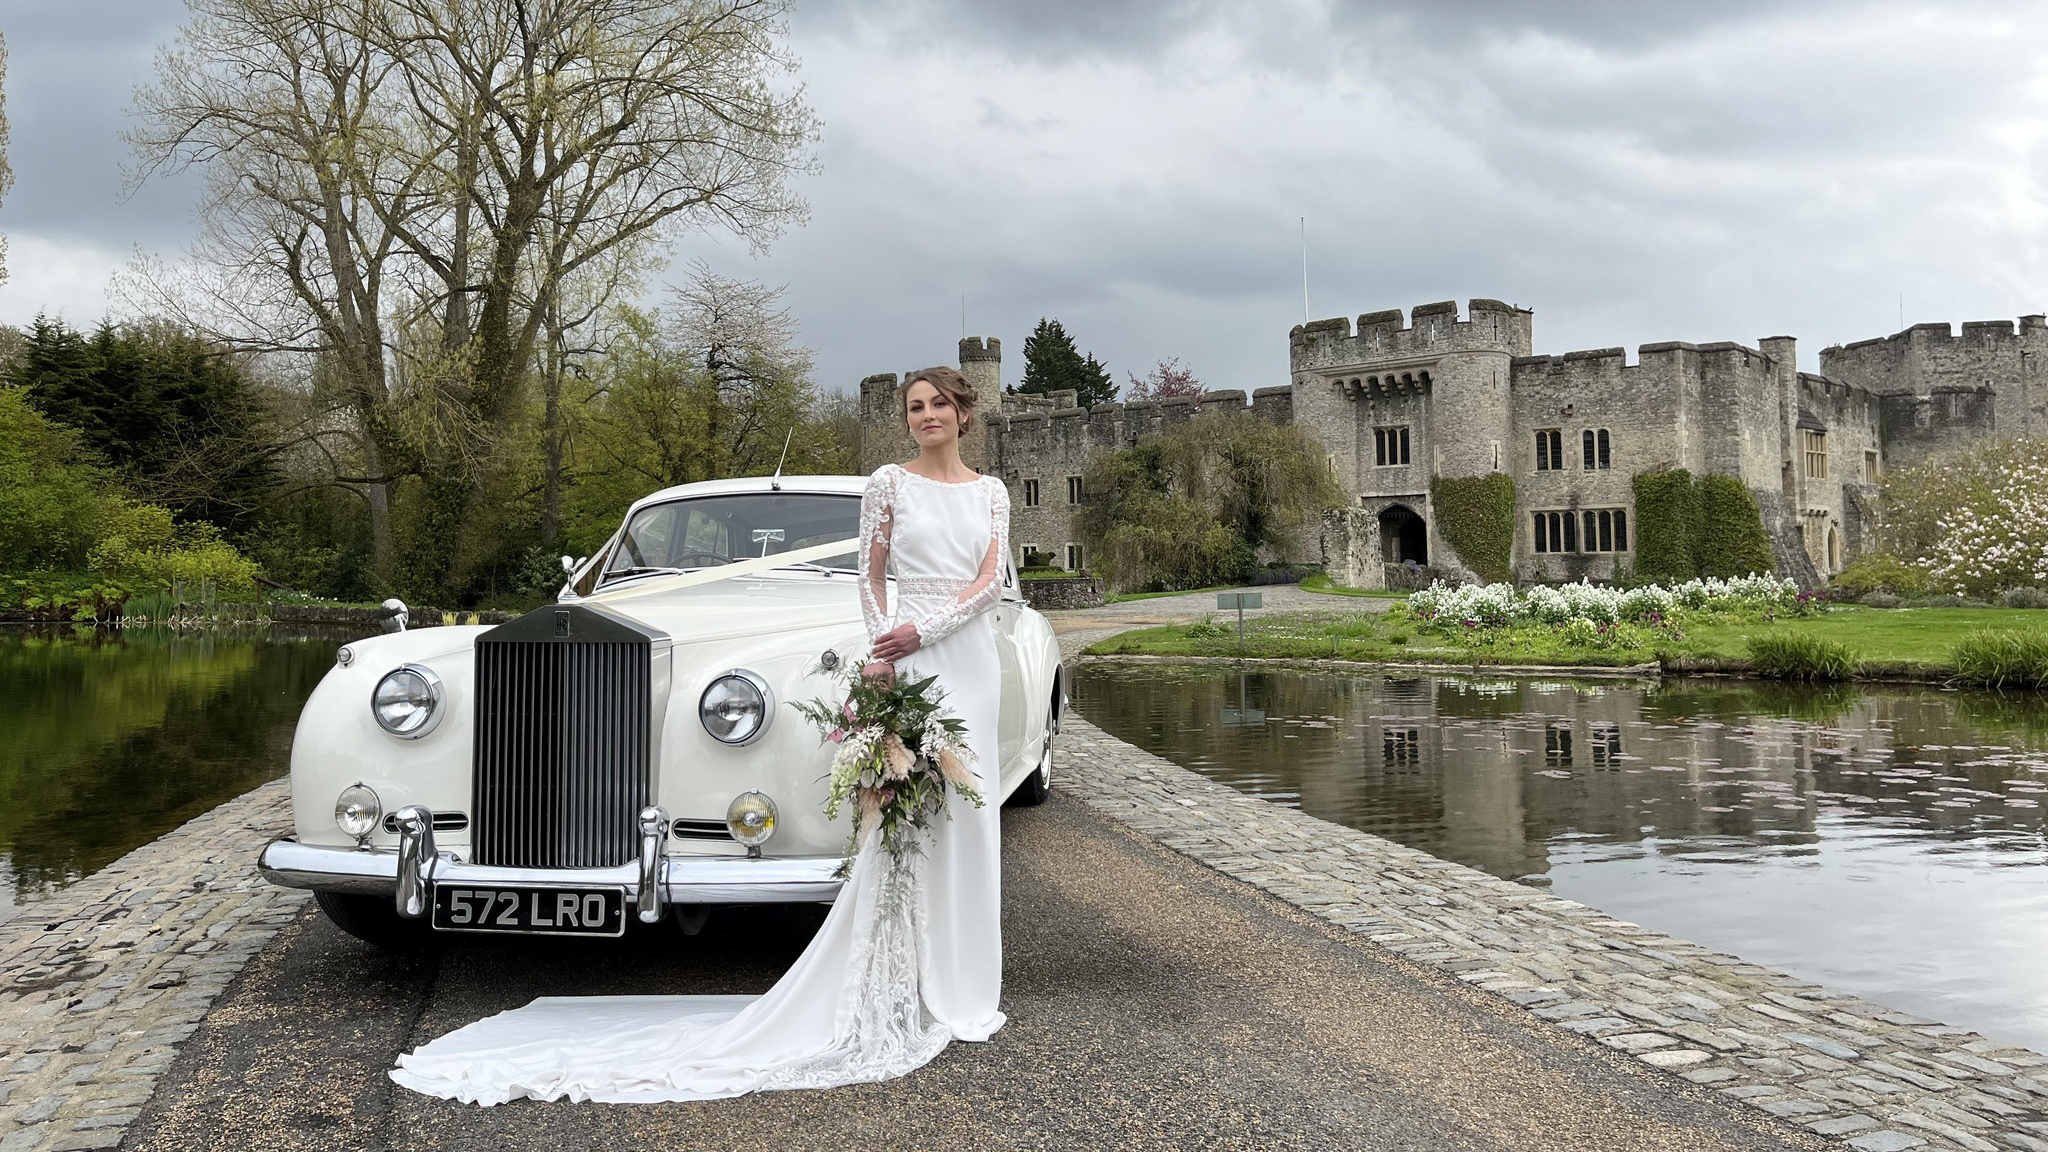 Classic Rolls-Royce Cloud in front of Allington Castle in Kent with bride wearing a white dress and holding a bridal bouquet in front of the vehicle.